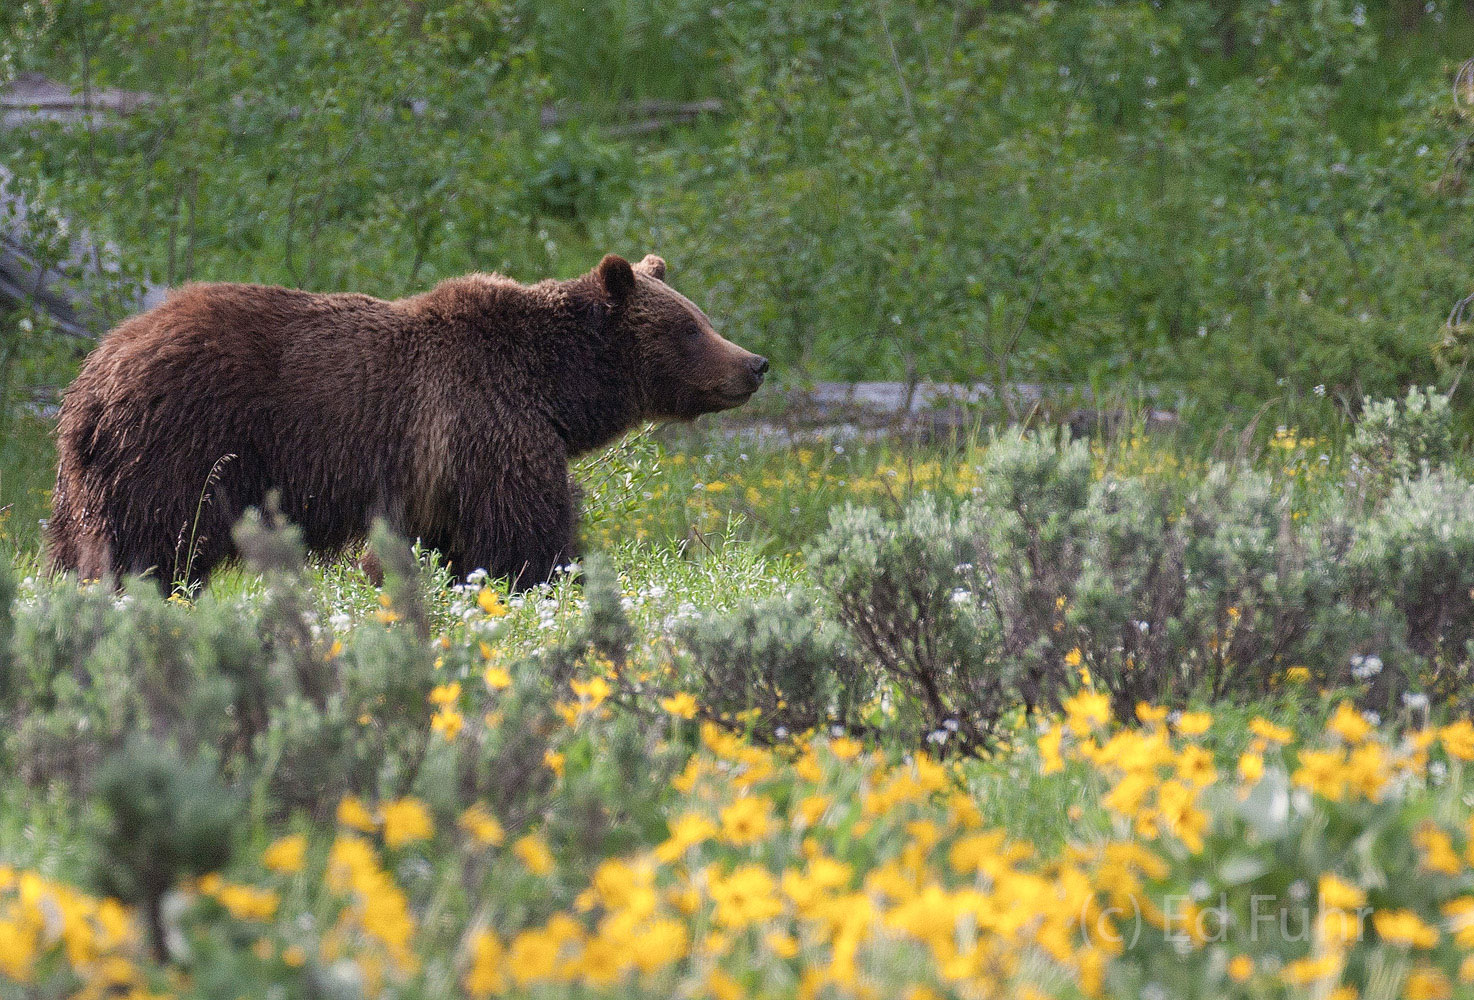 Grizzly 399 looks into the nearby woods where she has detected some sound or smell.